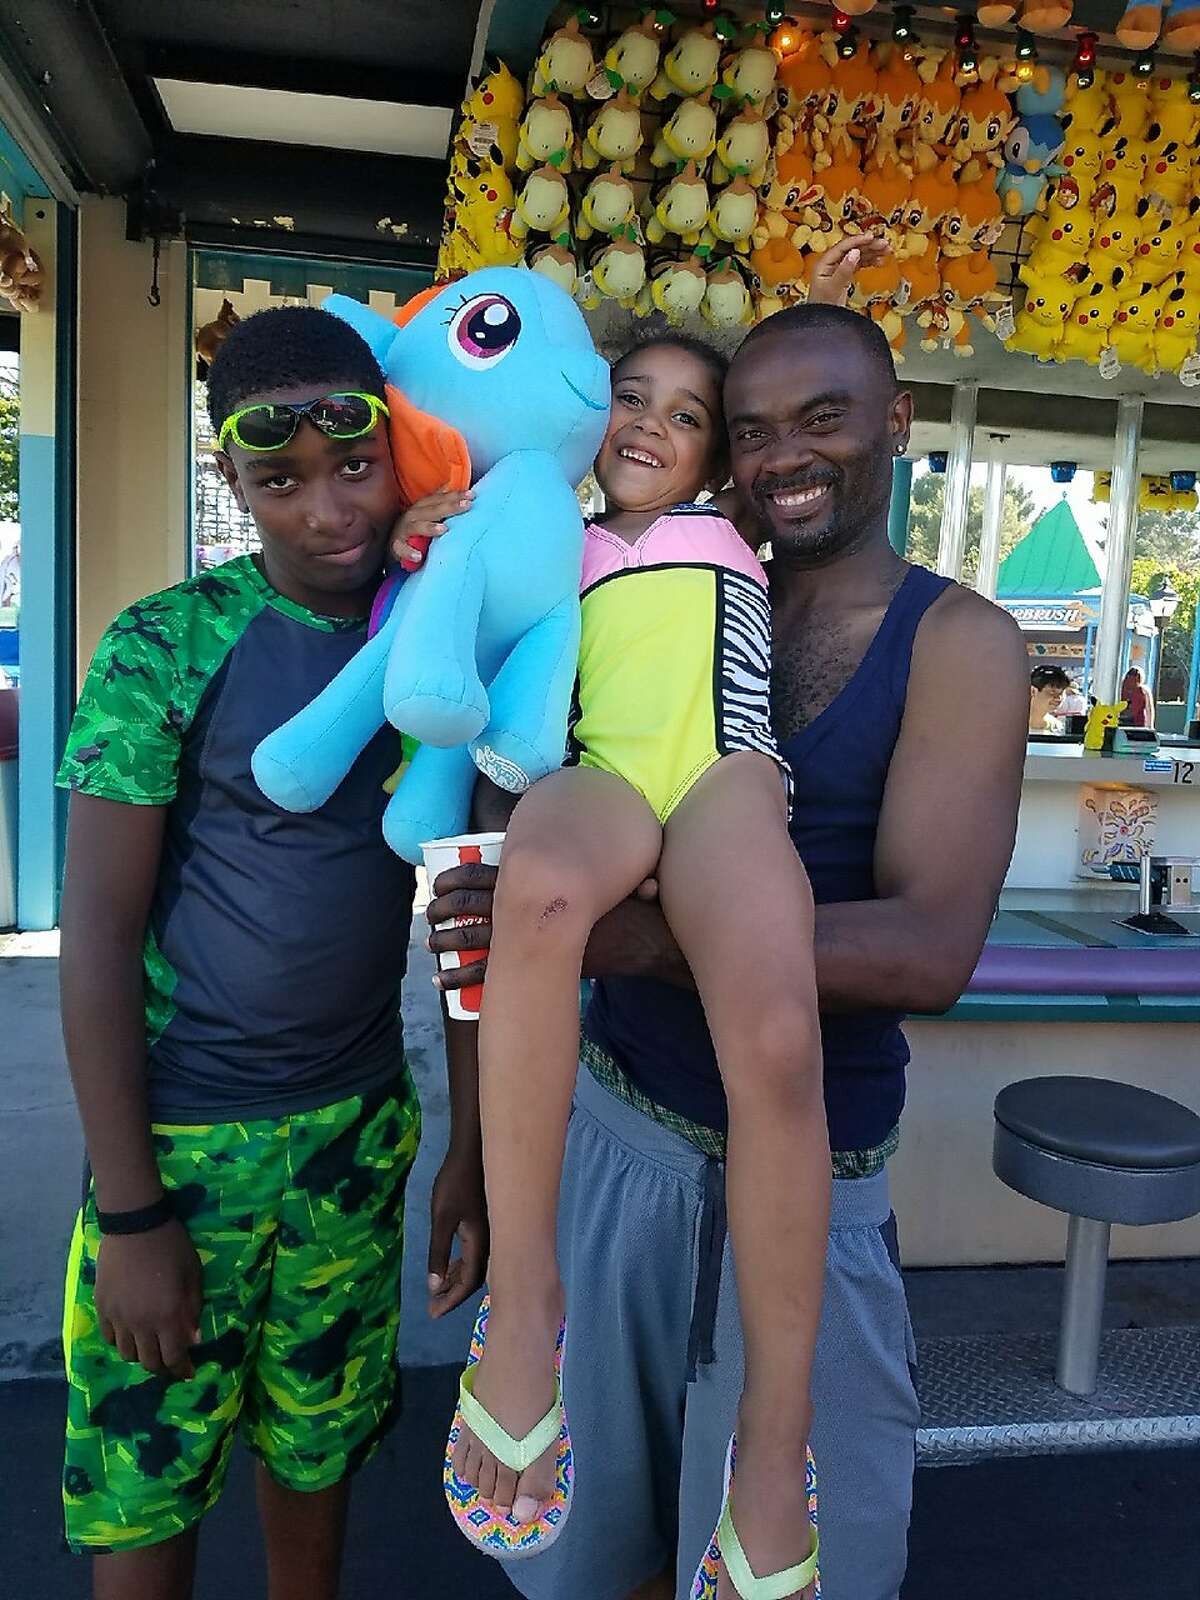 Ronell Foster, right, seen in this undated photo with his two children. Foster was fatally shot by a Vallejo police officer in February 2018. On Monday, the City of Vallejo released body camera video of Foster's death.